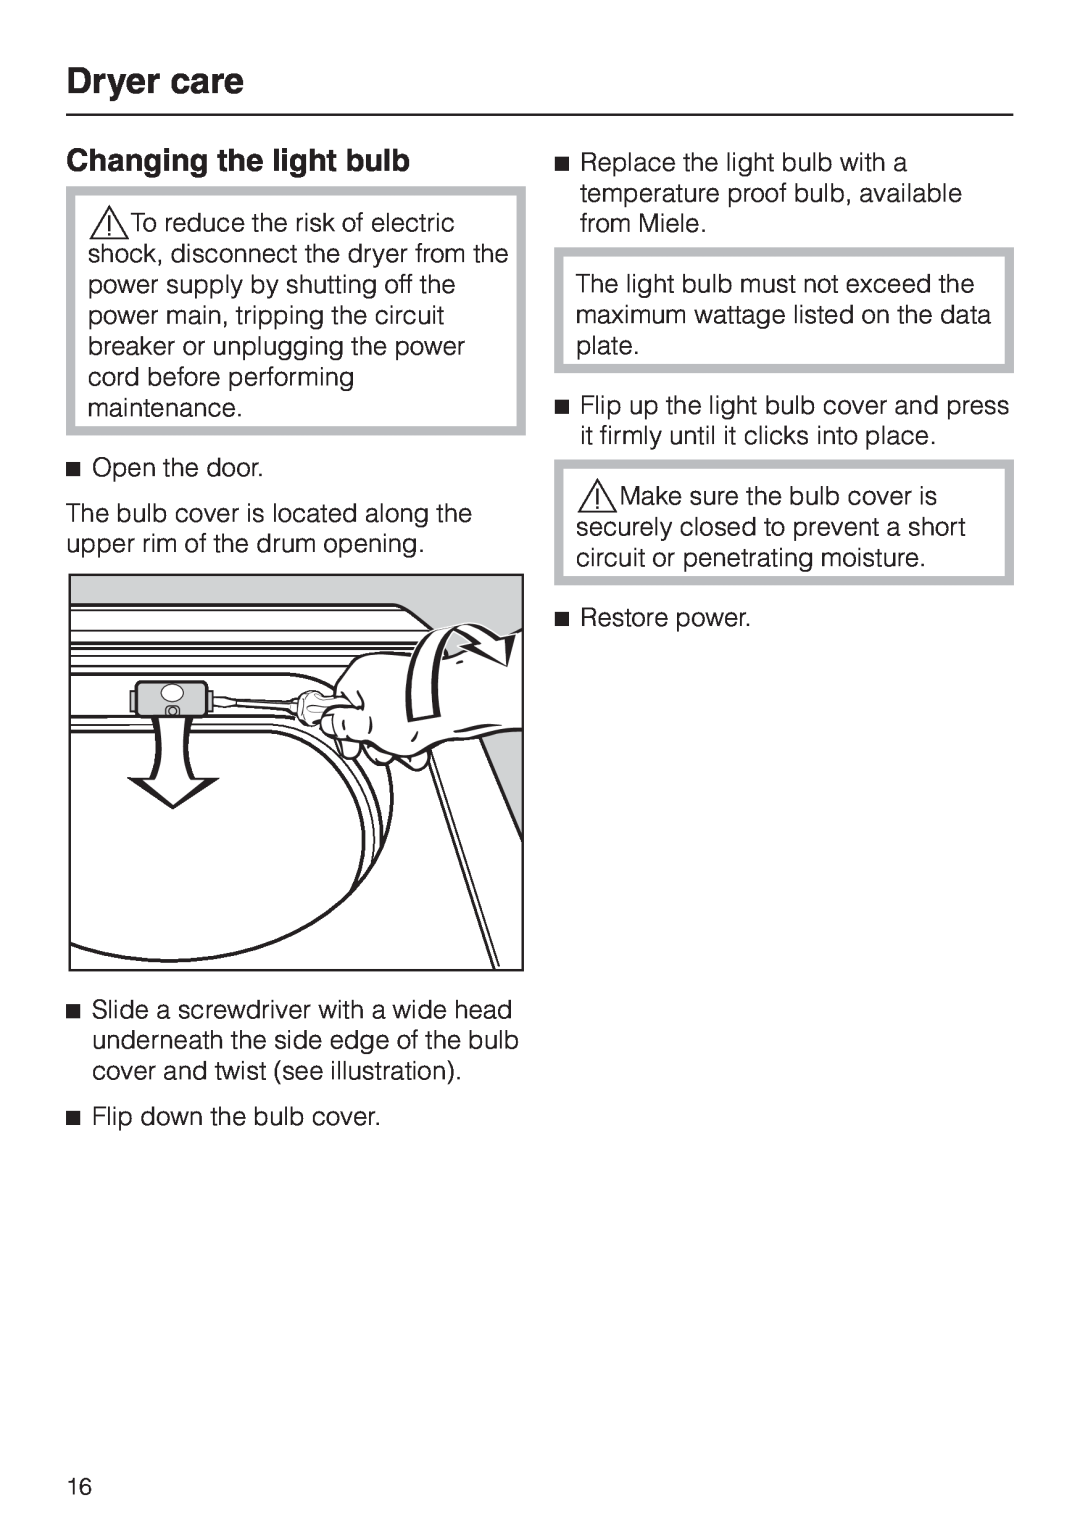 Miele T 1413 T 1415 operating instructions Changing the light bulb, Dryer care 